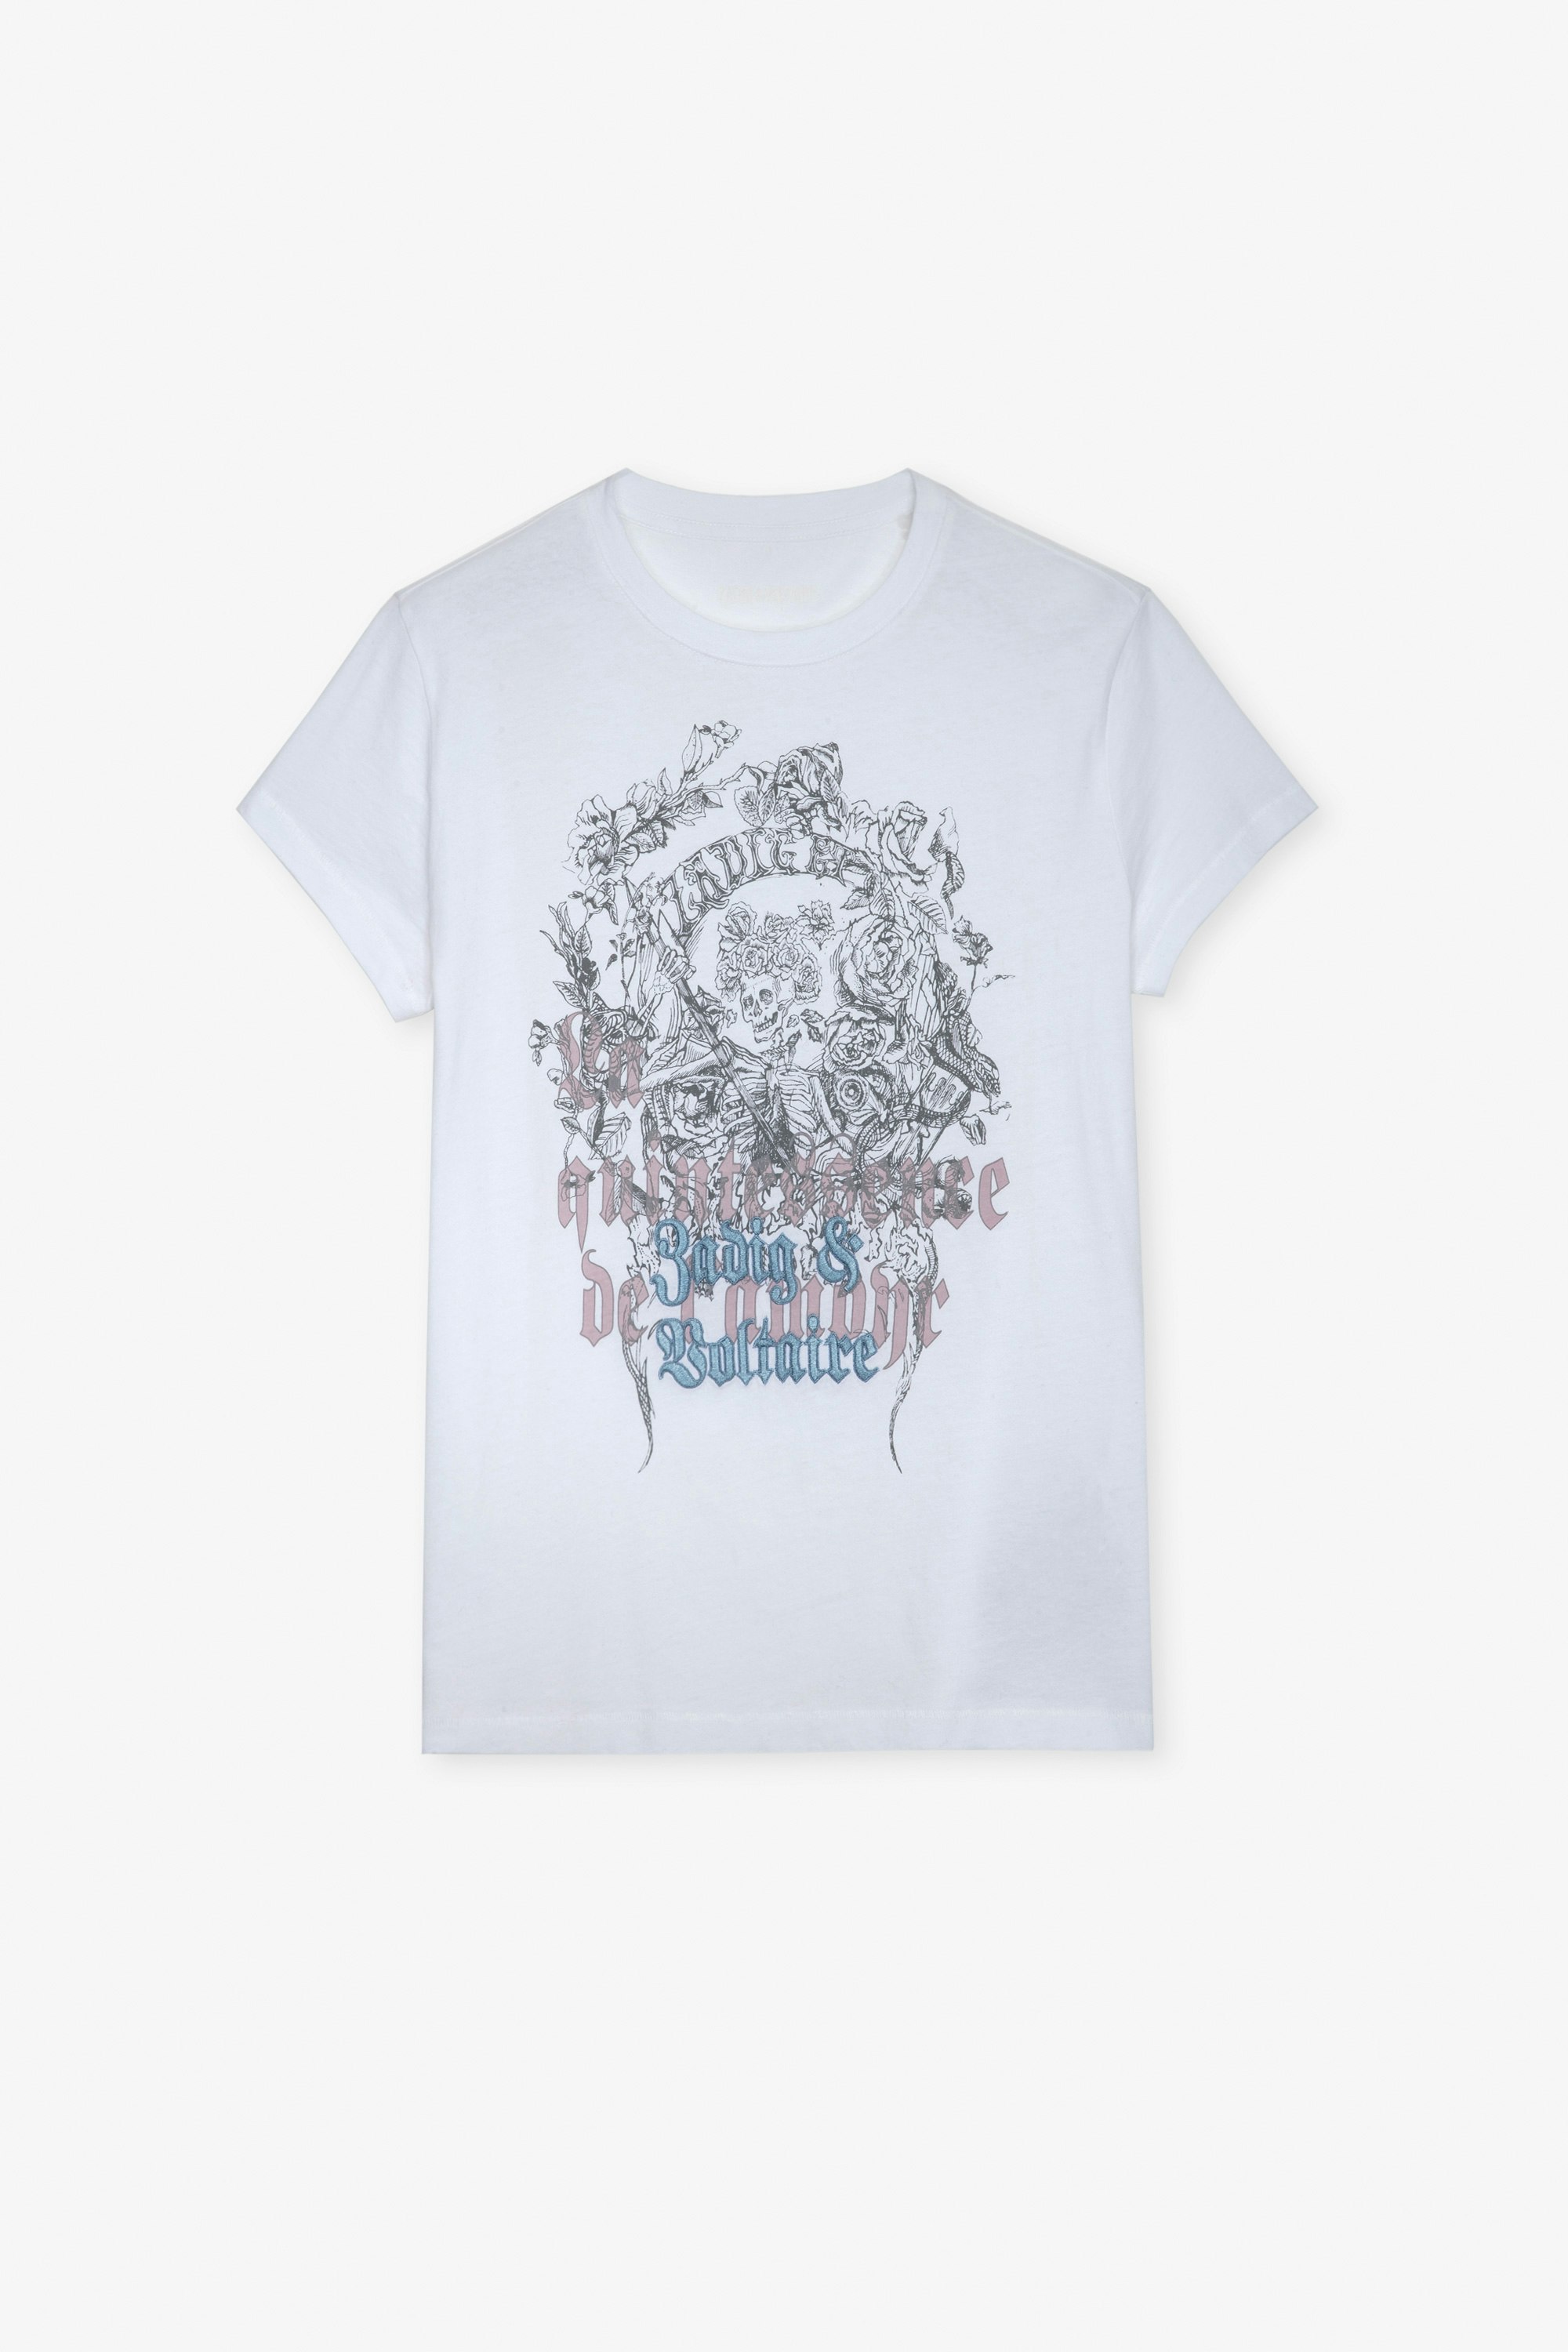 Walk Skull Reaper T-Shirt - Women's white cotton t-shirt with floral reaper print and "Zadig & Voltaire" embroidery on front.